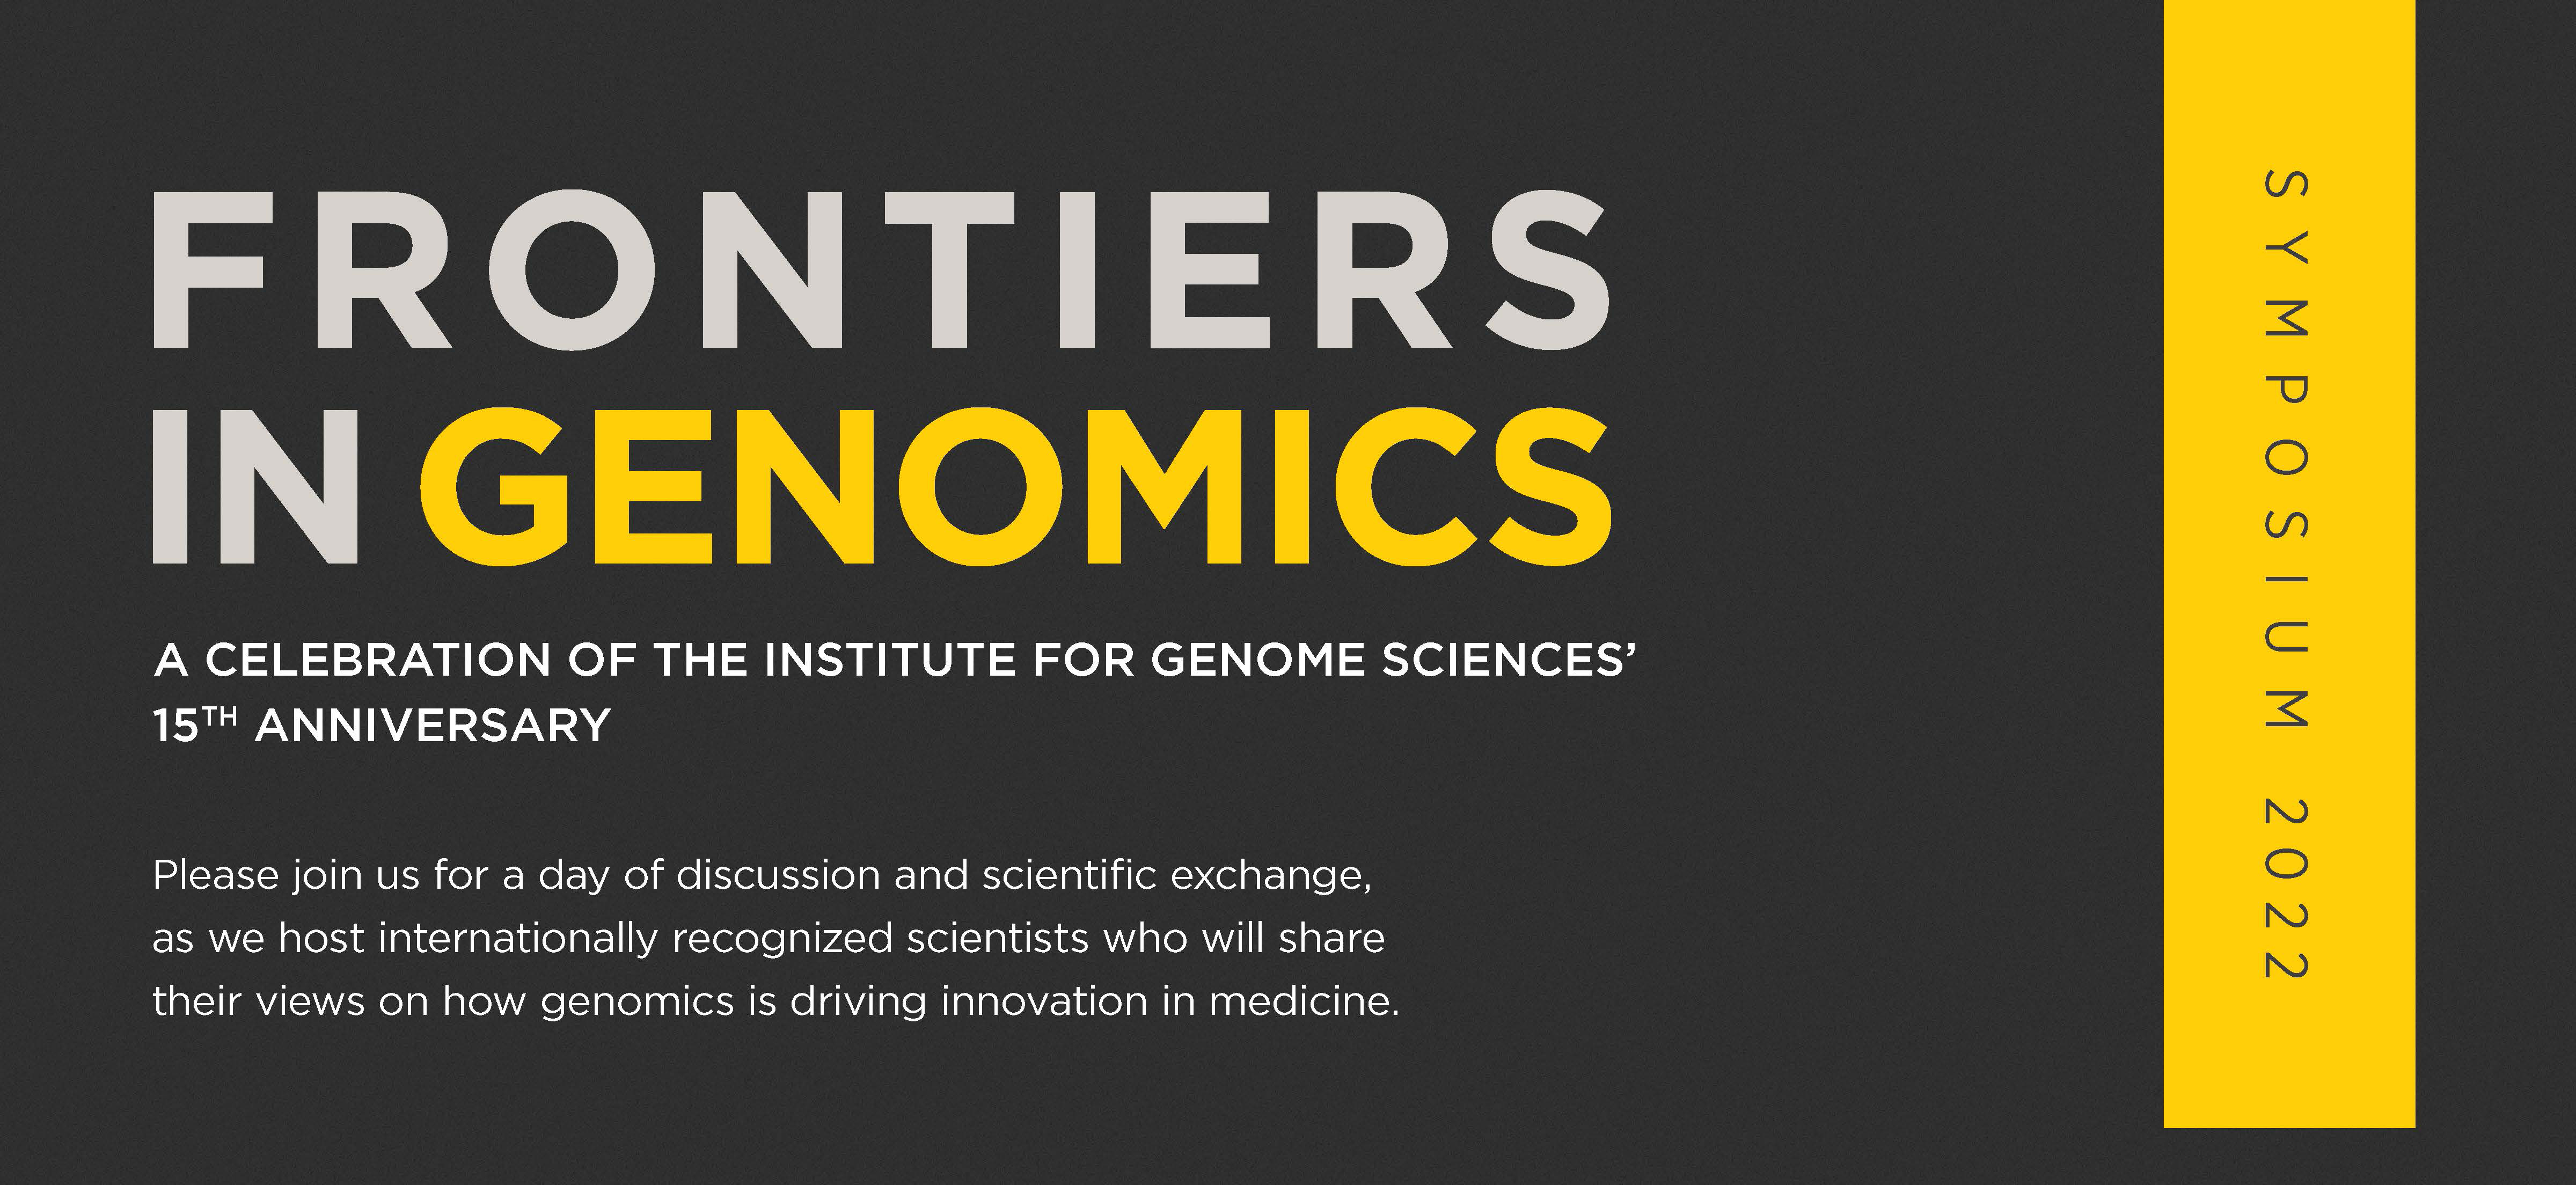 Frontiers In Genomics: A Celebration of the Institute for Genome Sciences’ 15th Anniversary